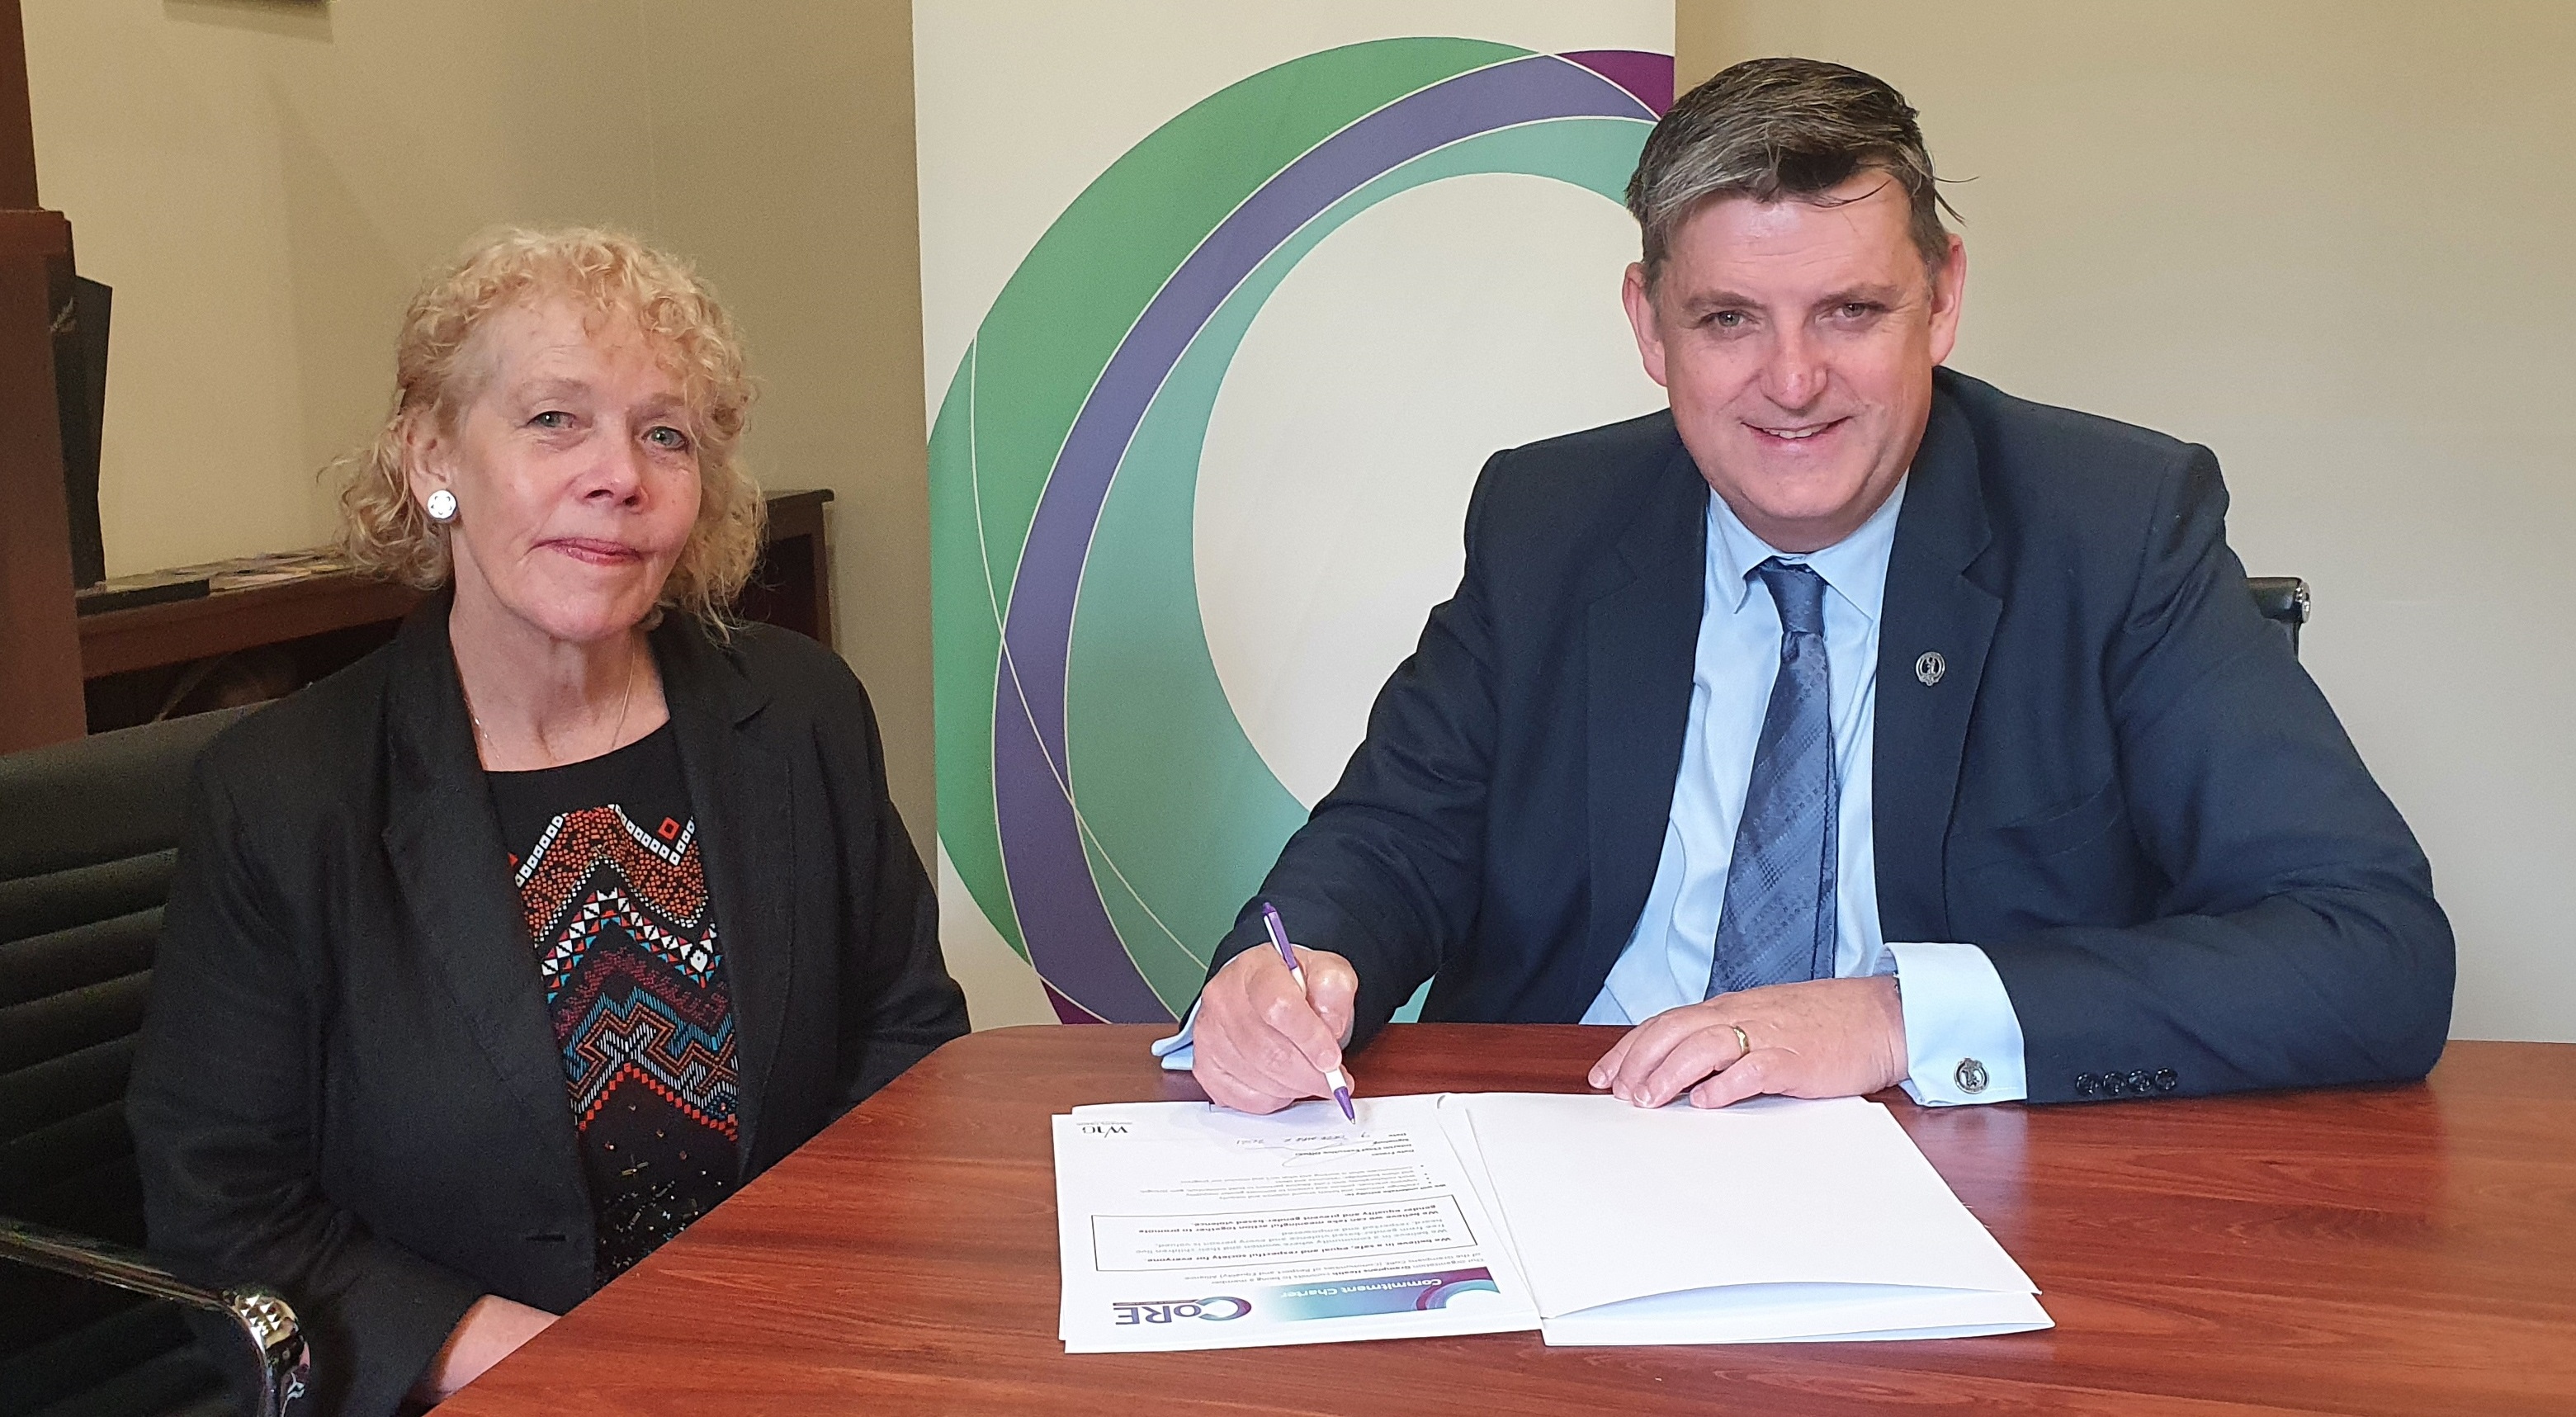 Marianne Hendron and Dale Fraser at the Grampians Health CoRE Alliance signing